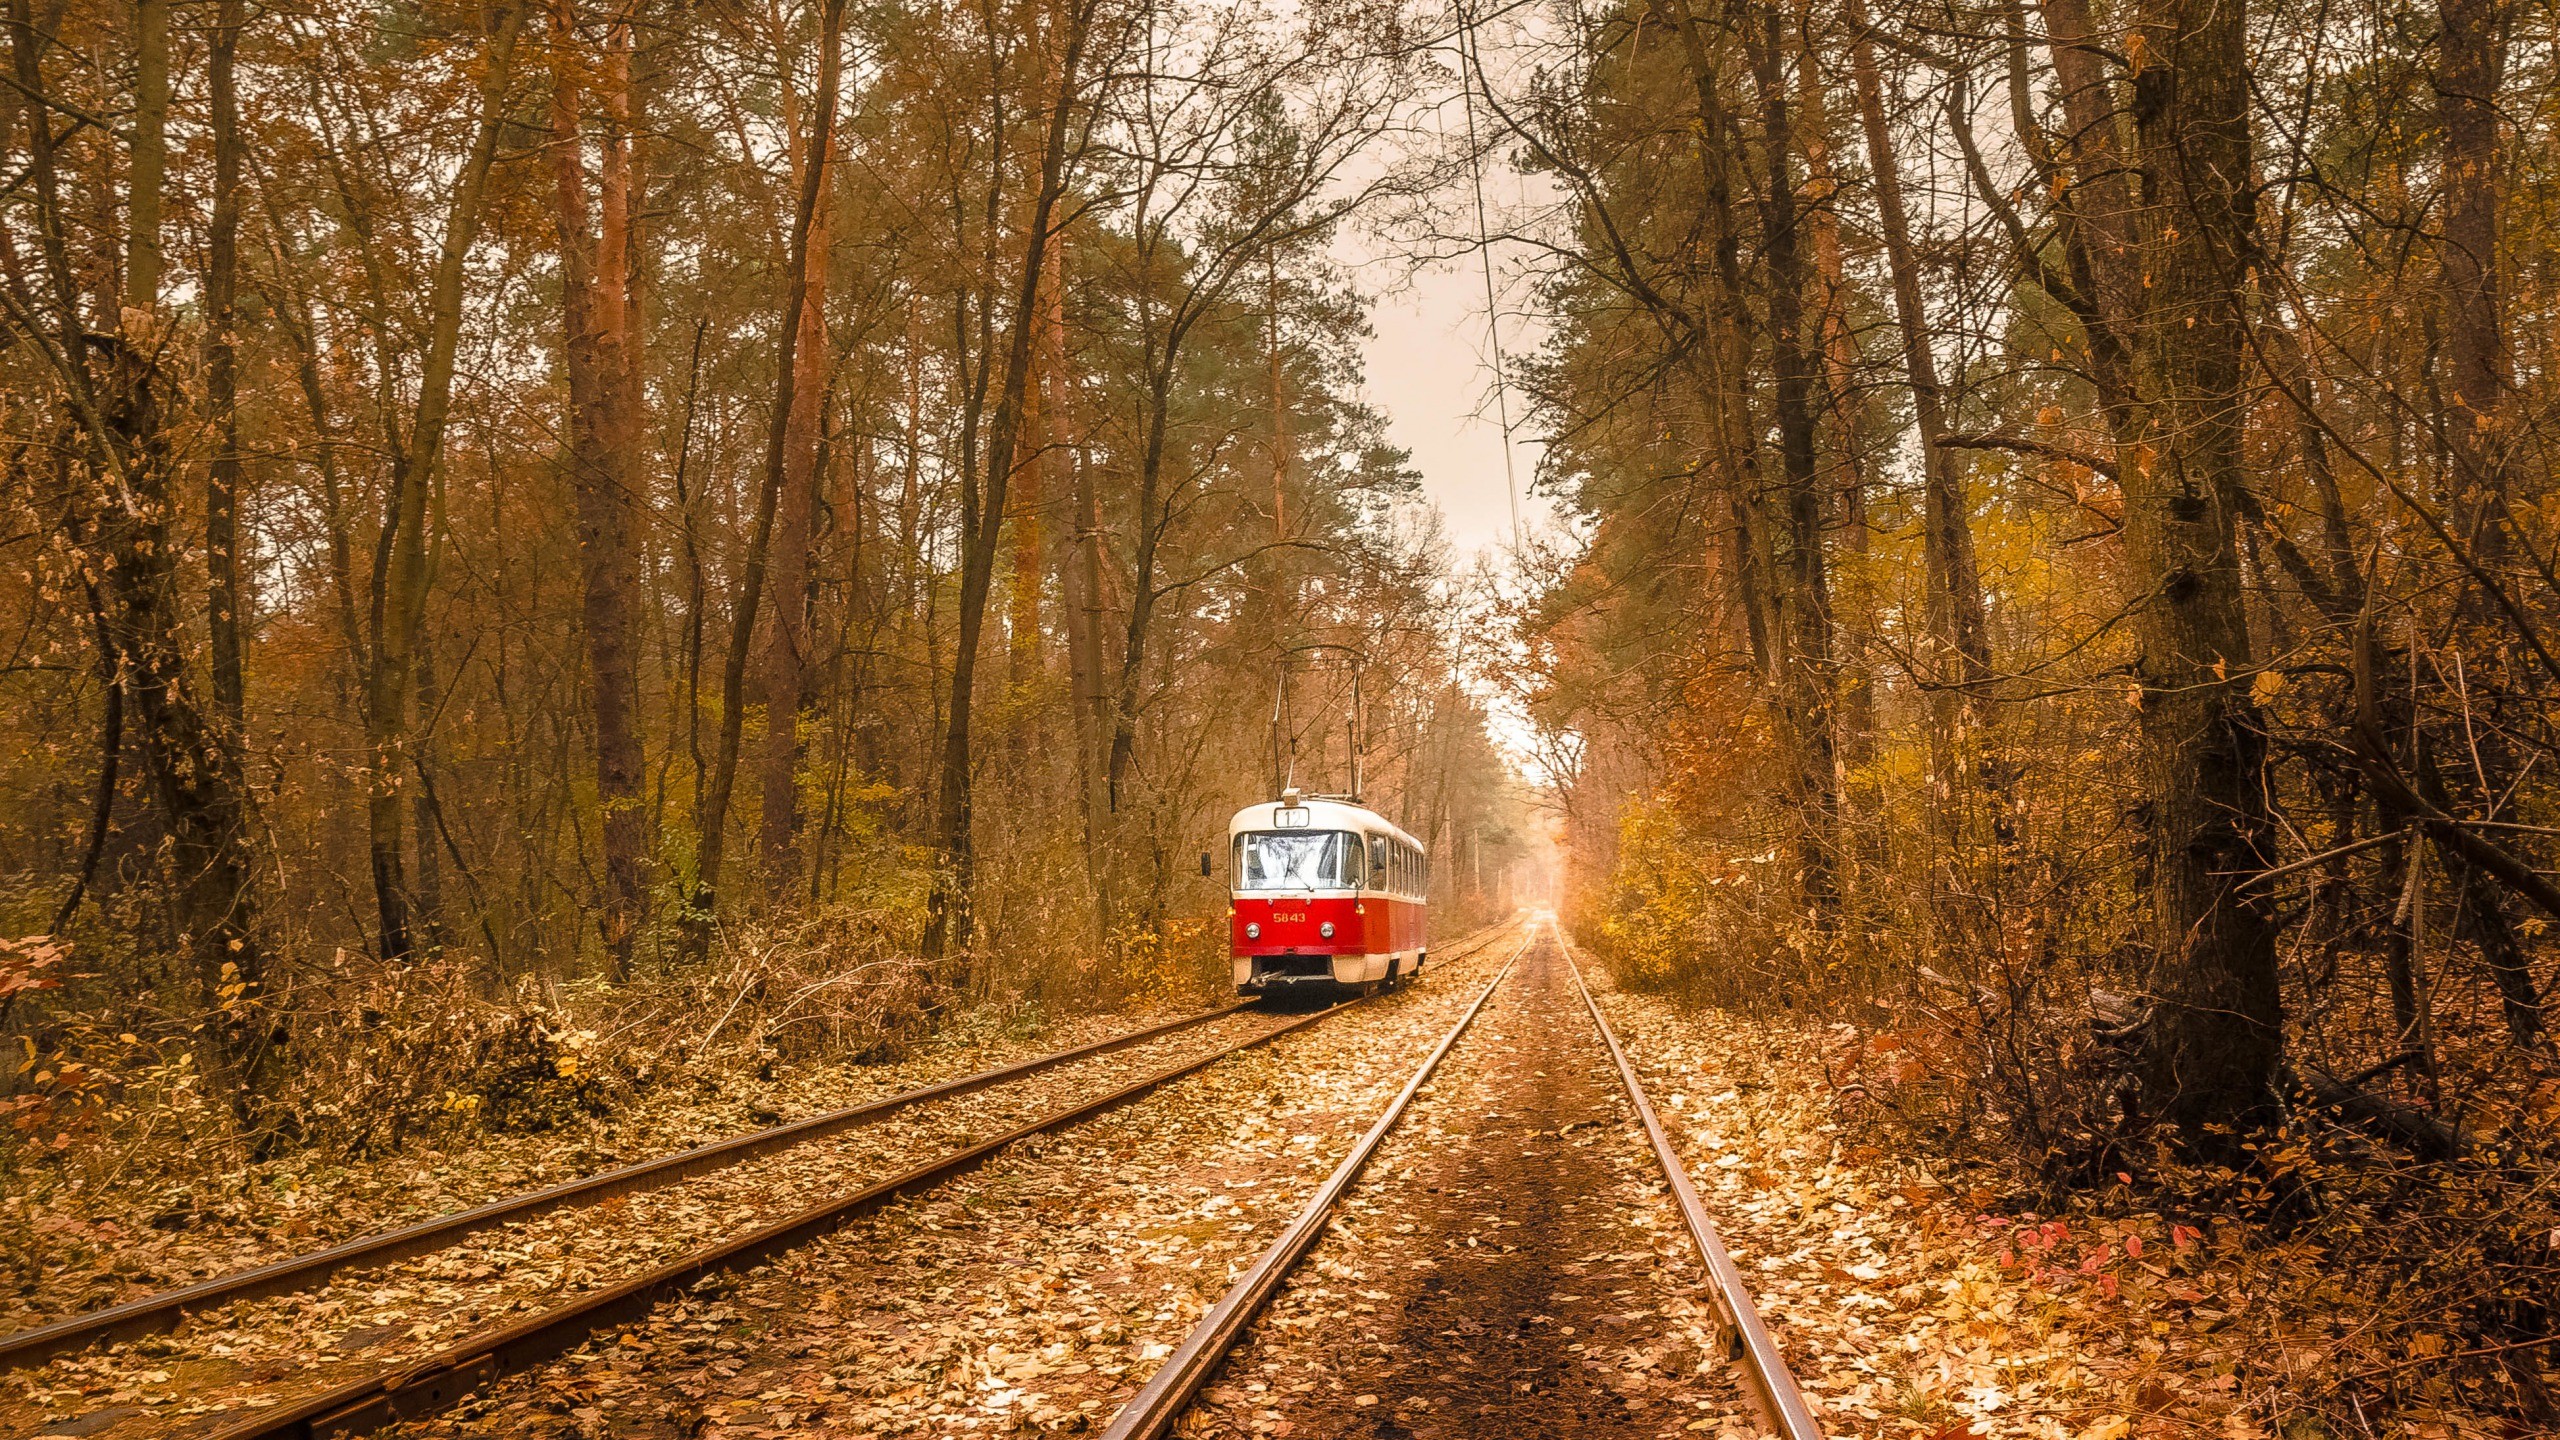 General 2560x1440 nature trees leaves vehicle tram forest branch fall wires 500px Kyiv Ukraine 2015 (Year) yellow leaves electricity railway